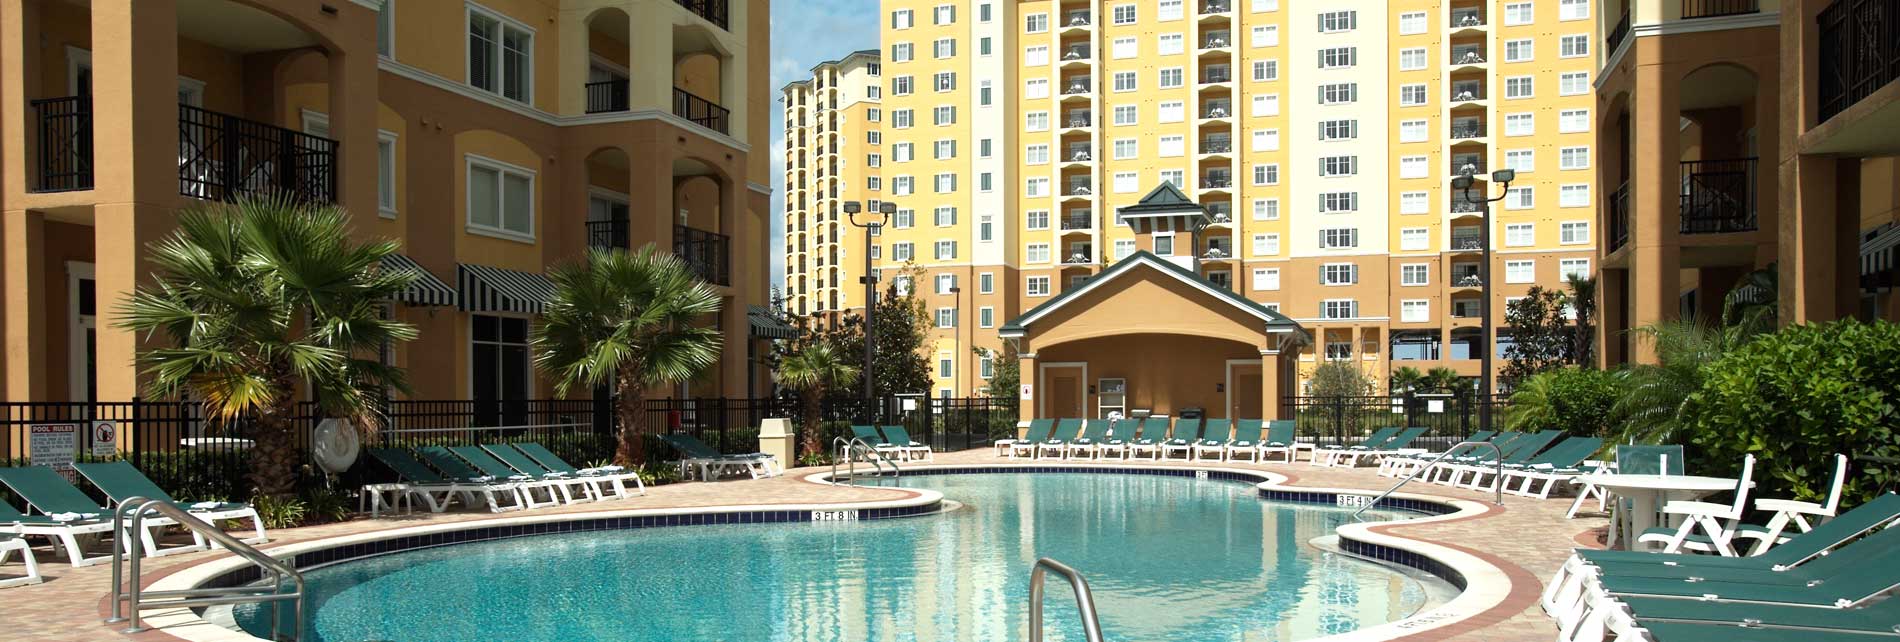 Orlando Hotel Suites Hotels Near Disney Springs Contact Lake